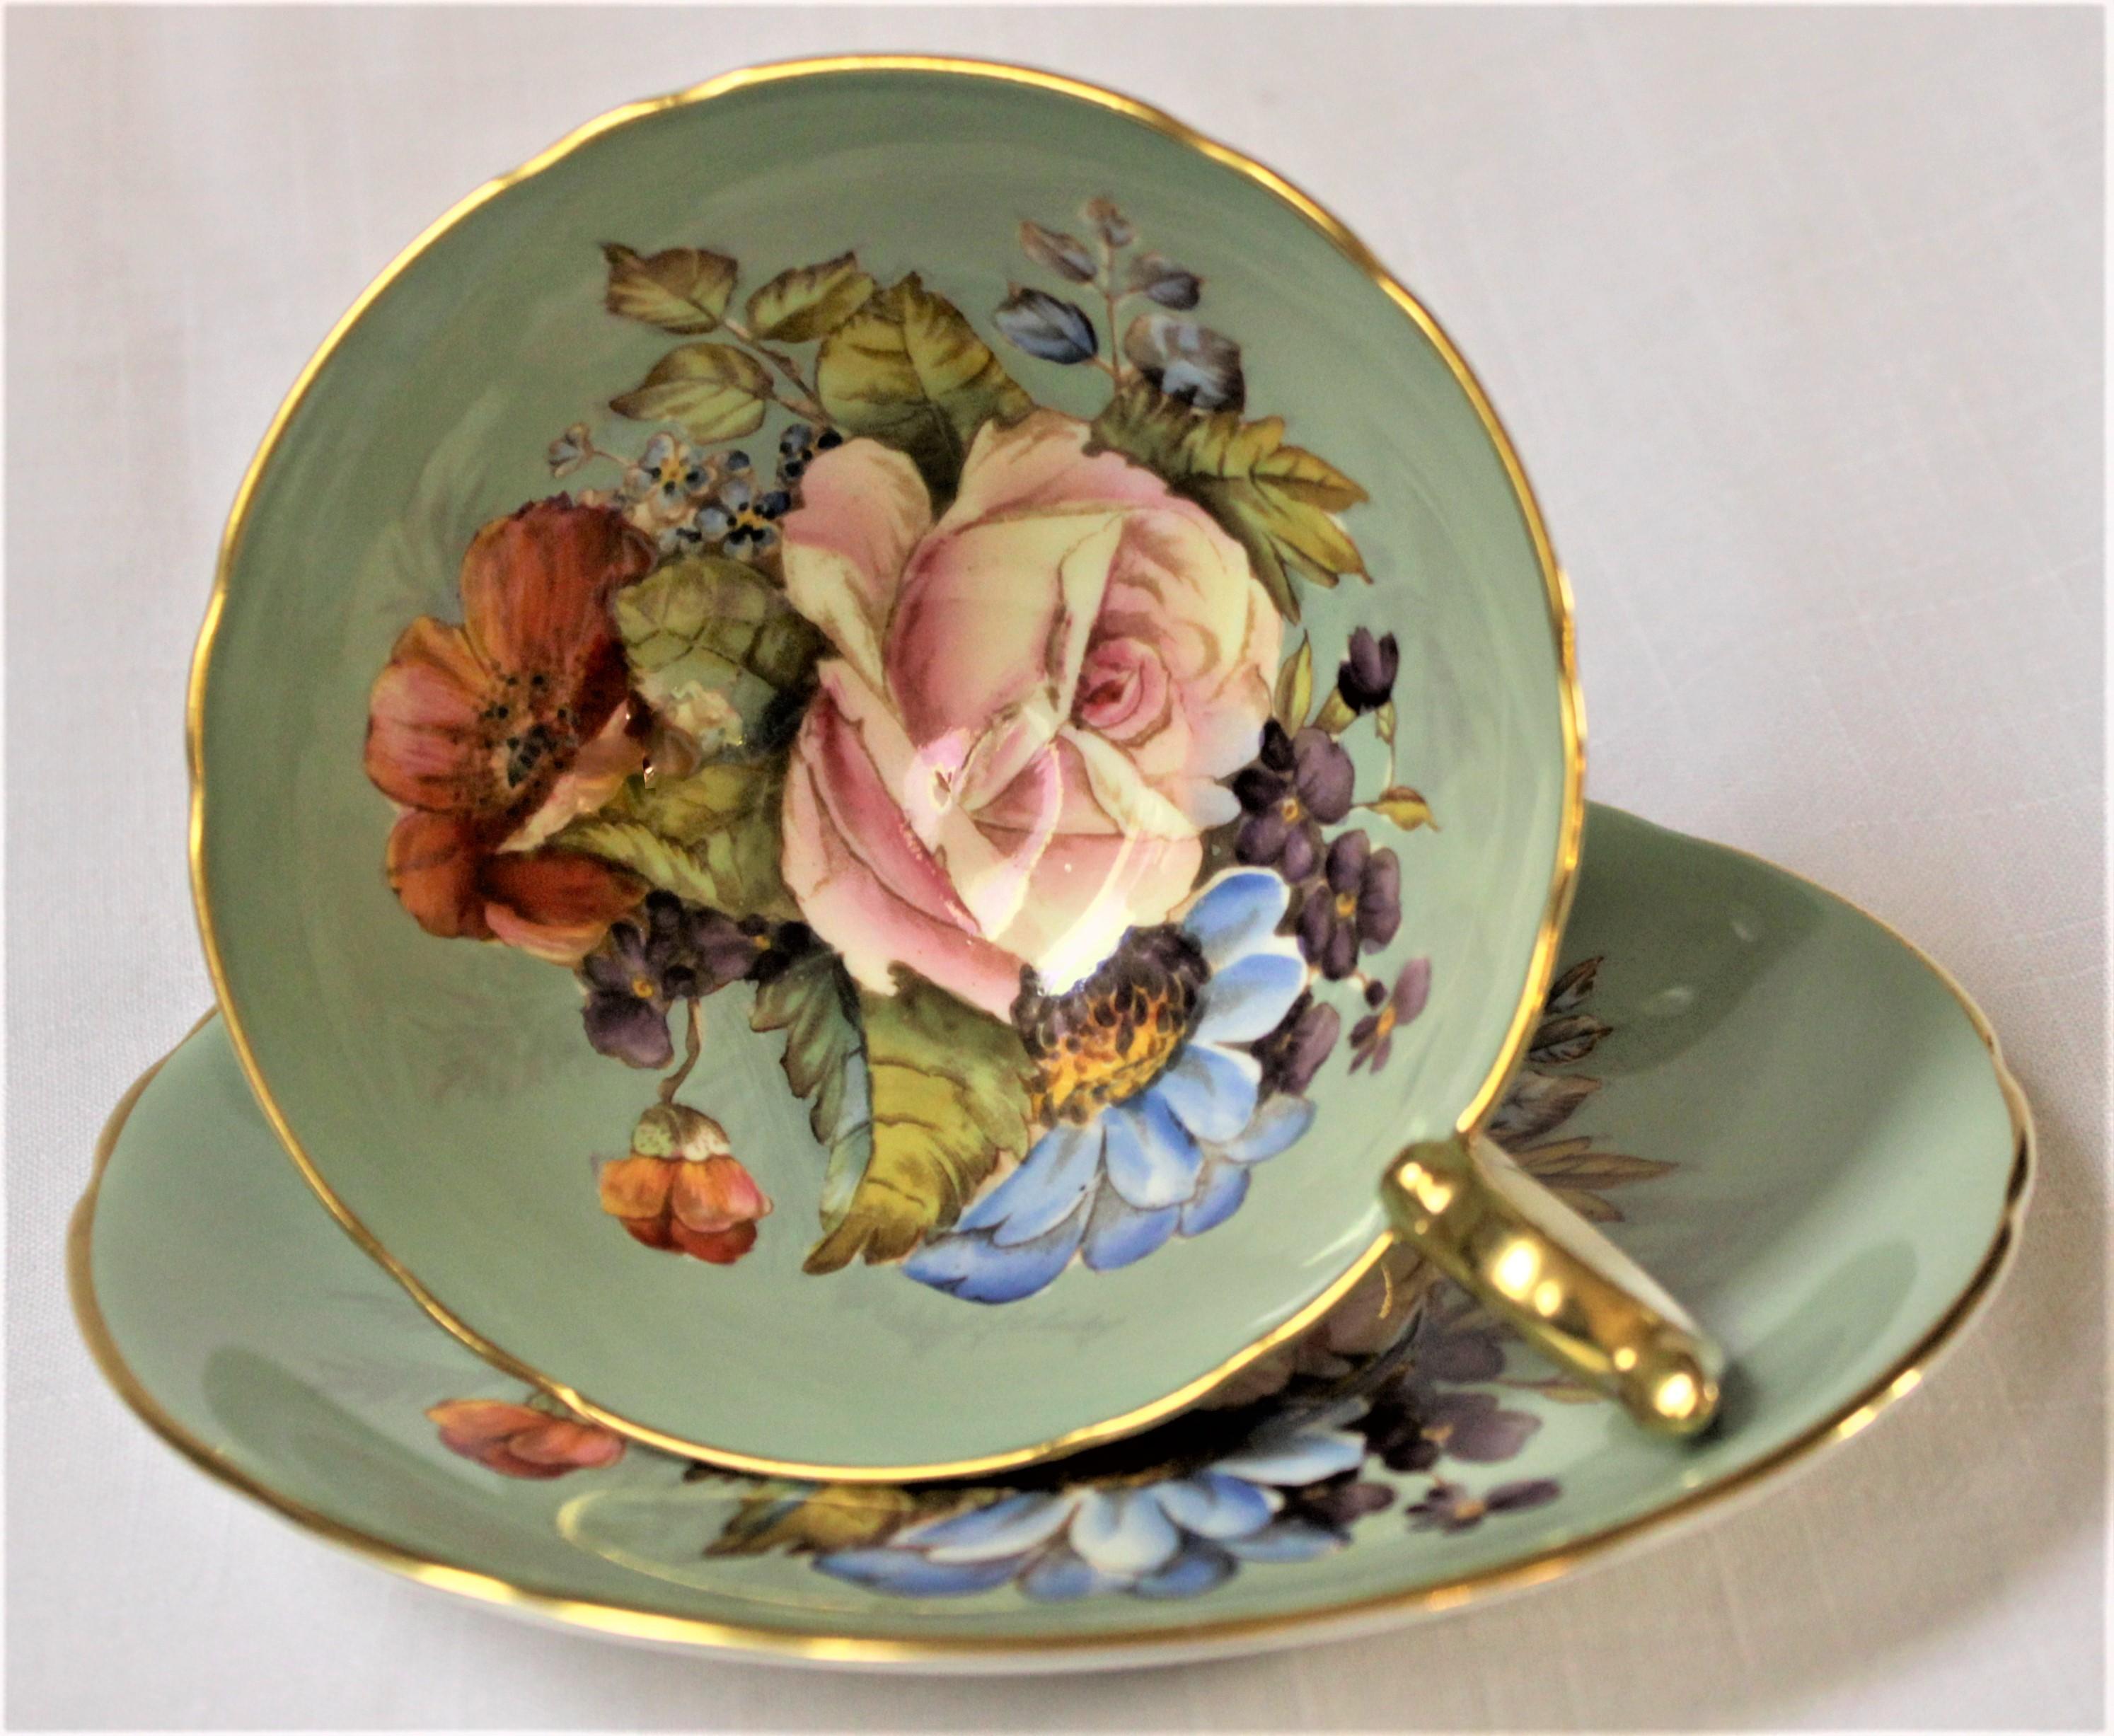 This very intricately hand painted tea cup and saucer set is made by the John Aynsley factory of England and are both are artist-signed by J.A. Bailey. This bowl of this cup is done with a floral bouquet with a large central pink cabbage rose. The